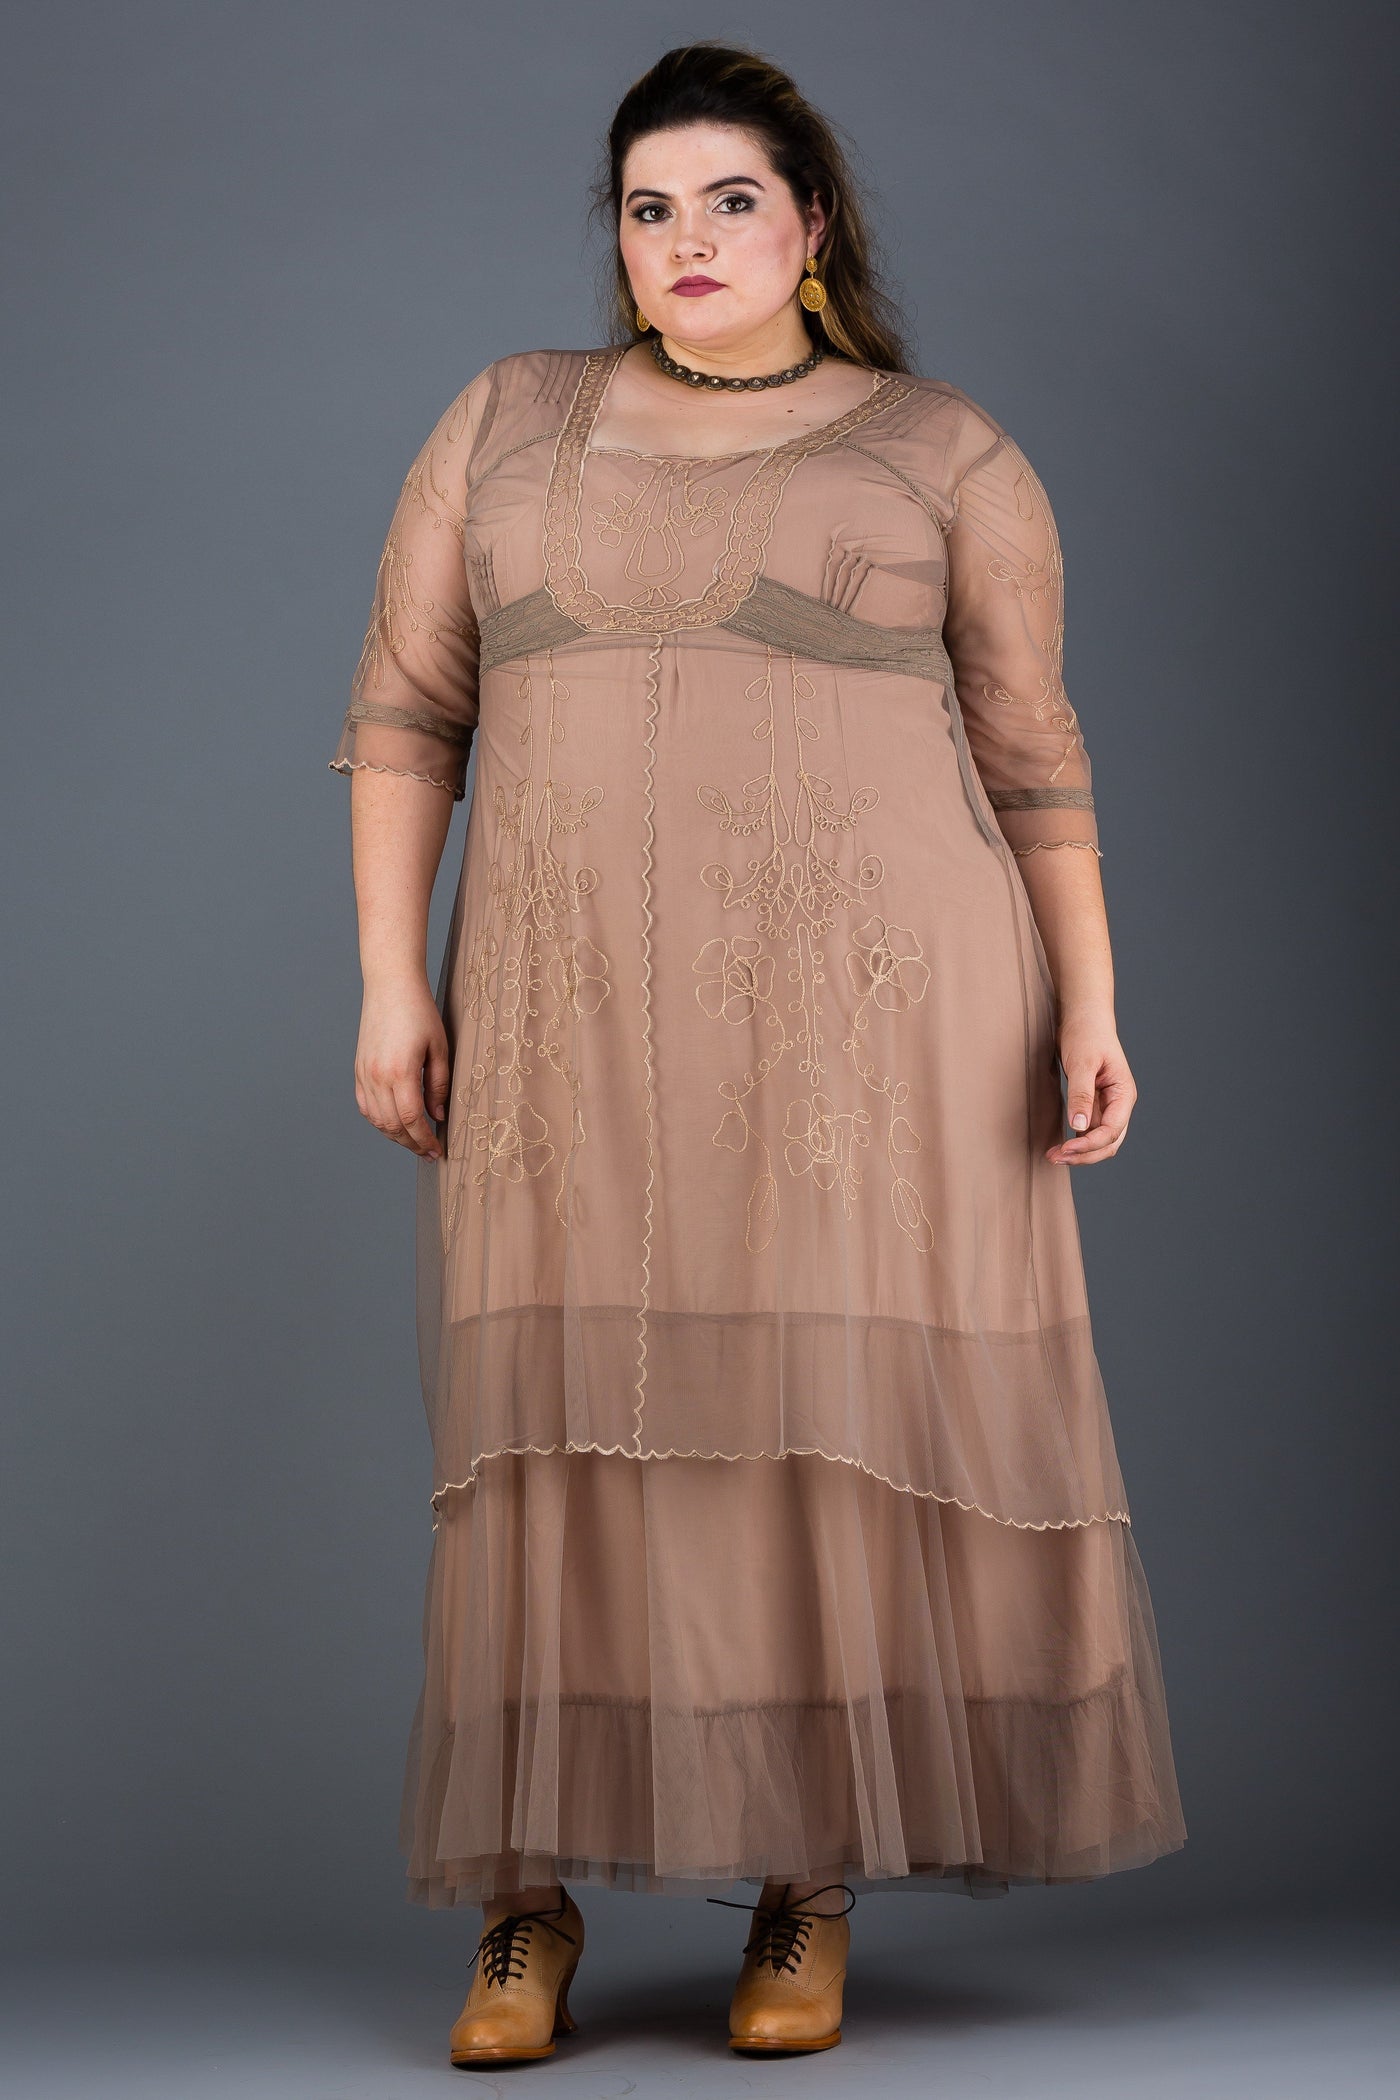 Plus Size Victoria Vintage Style Party Gown in Sand by Nataya